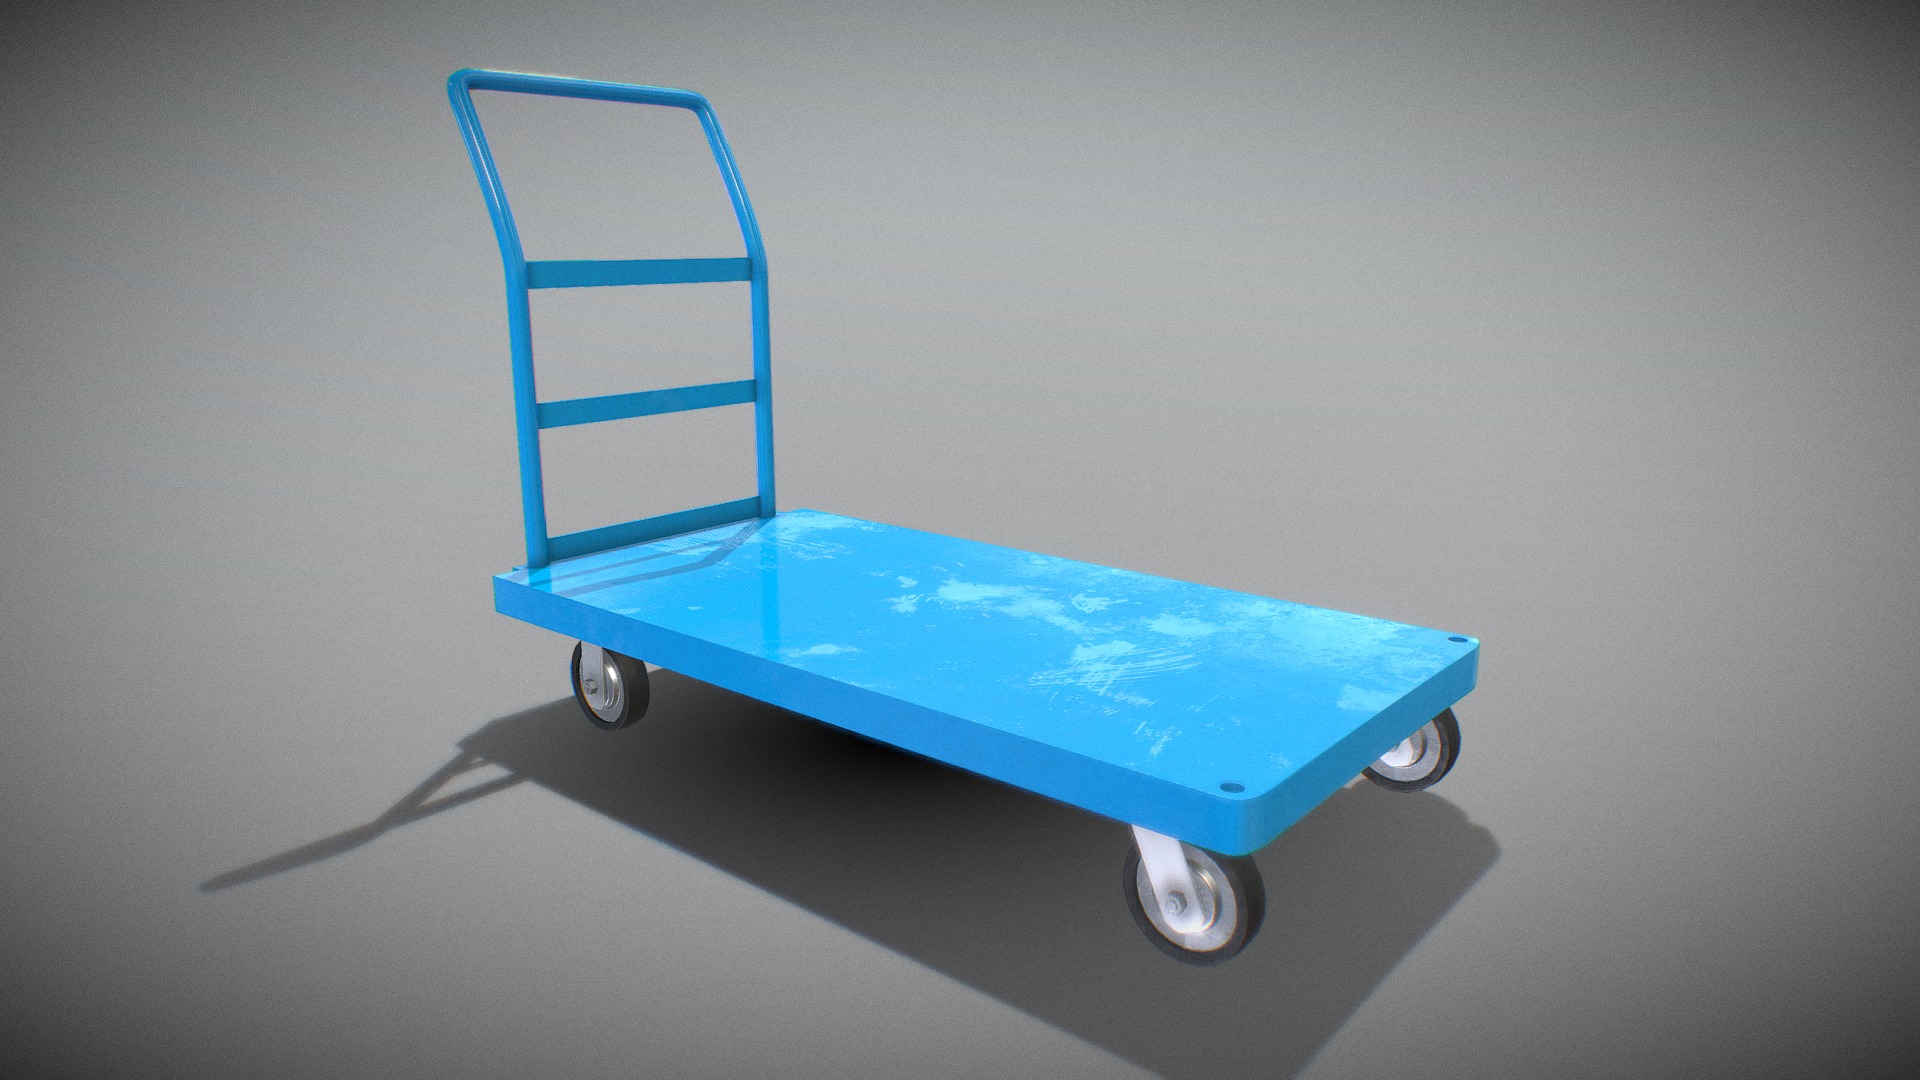 3D model Steel Cart blue painted - This is a 3D model of the Steel Cart blue painted. The 3D model is about a blue and white toy car.